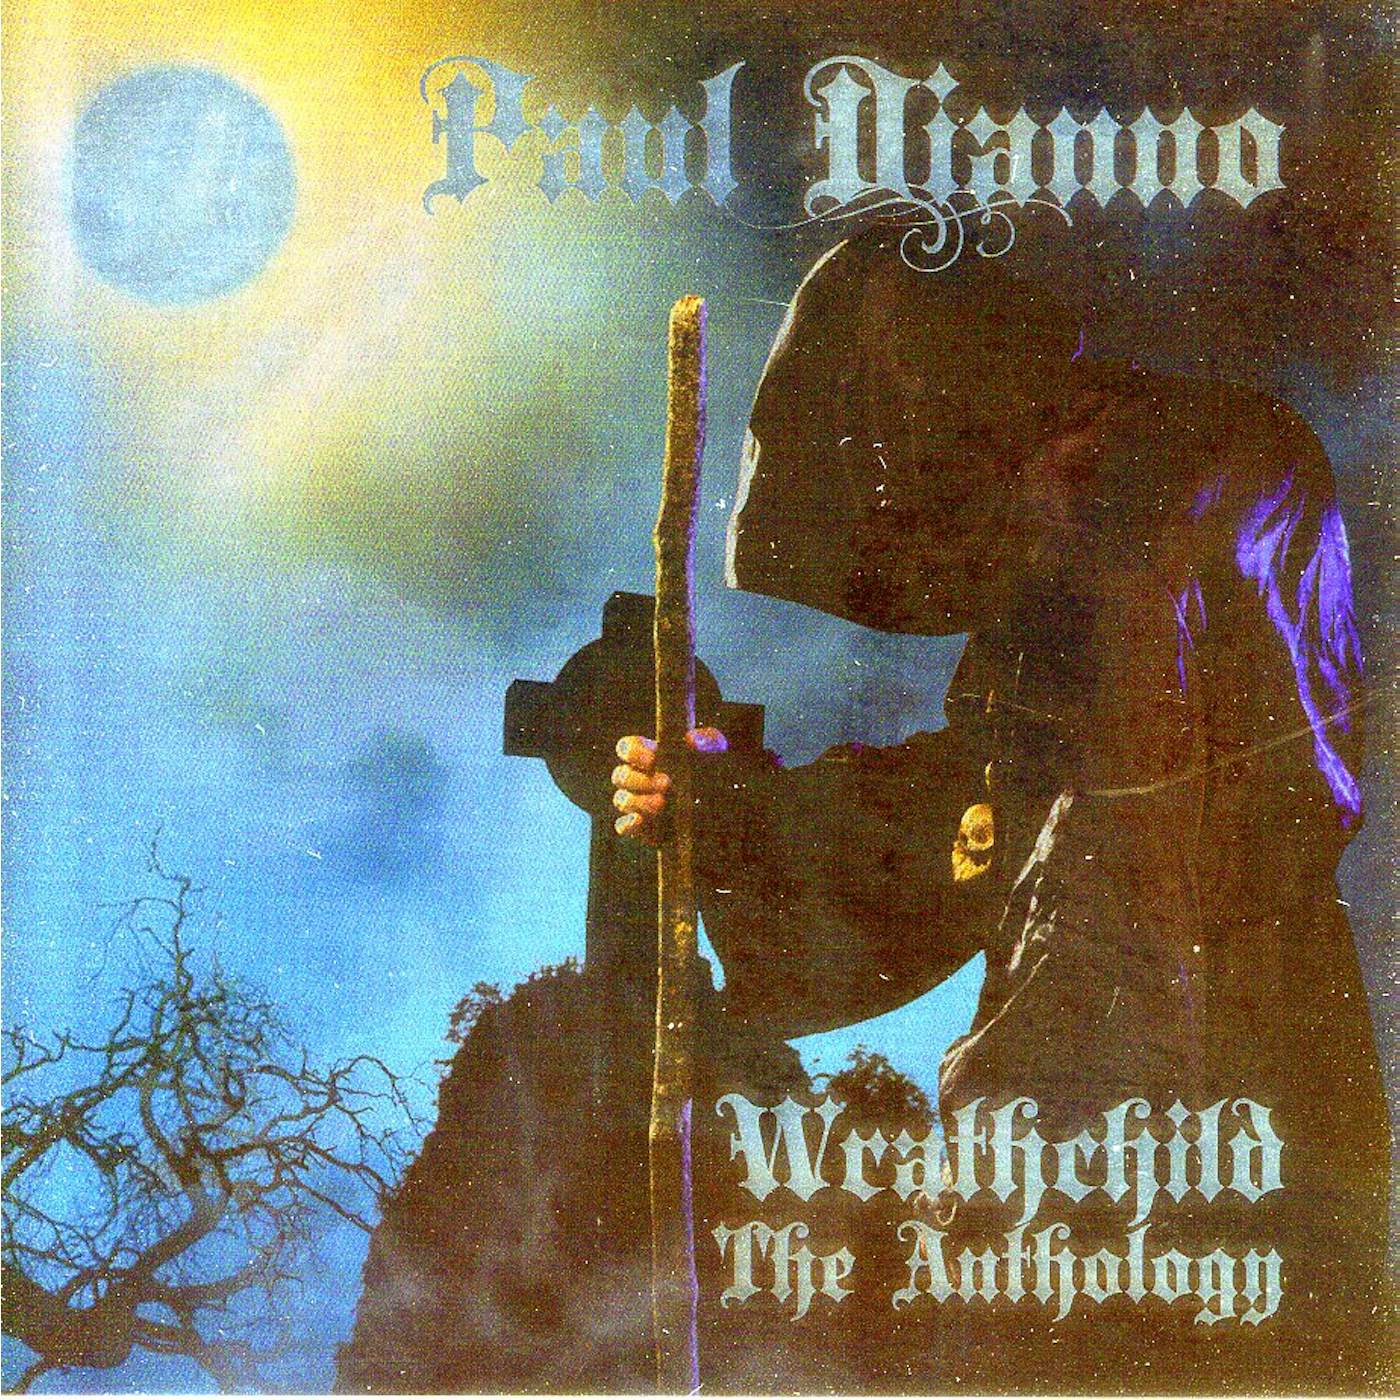 Paul Di'Anno WRATHCHILD - THE ANTHOLOGY CD